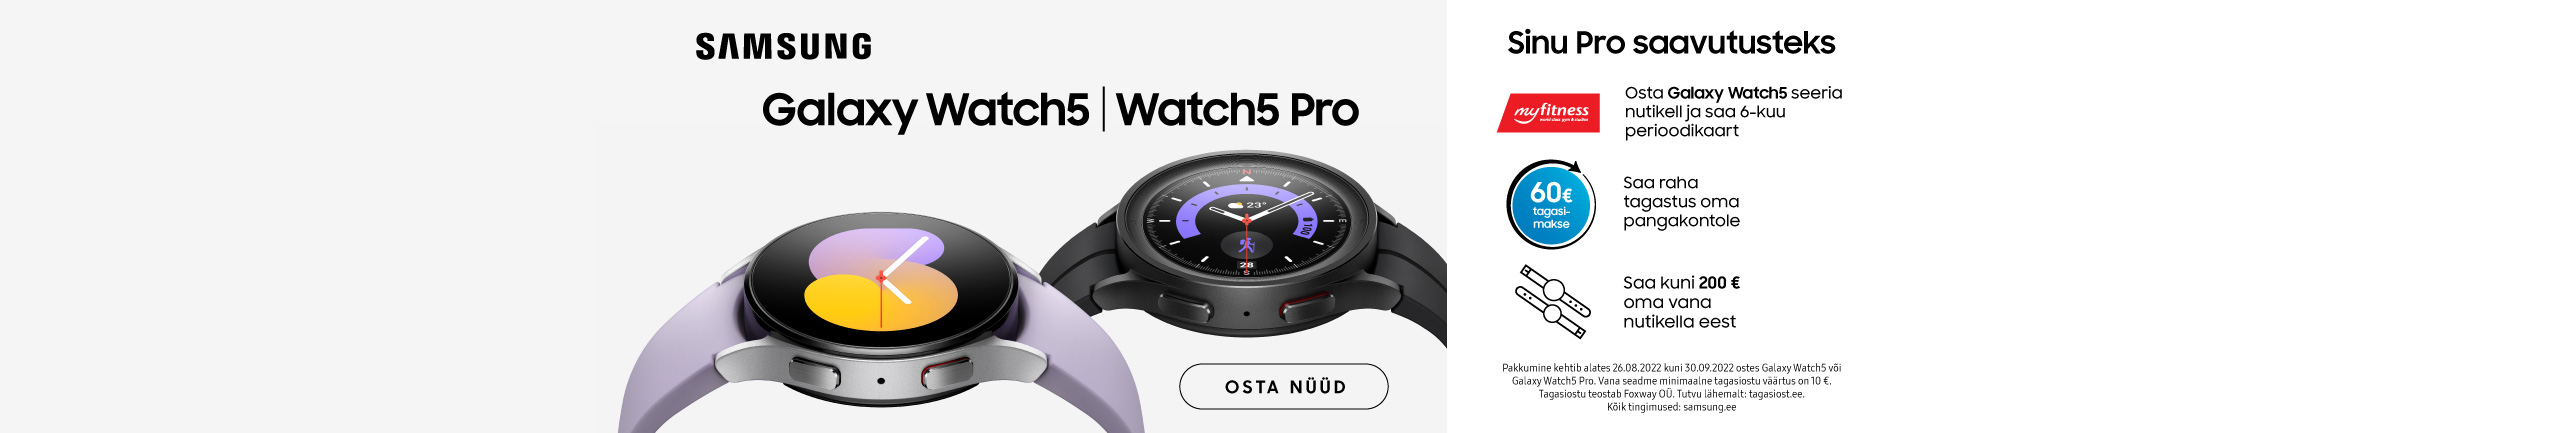 Buy Samsung Galaxy Watch 5 or Watch 5 Pro and get complimentary gifts!